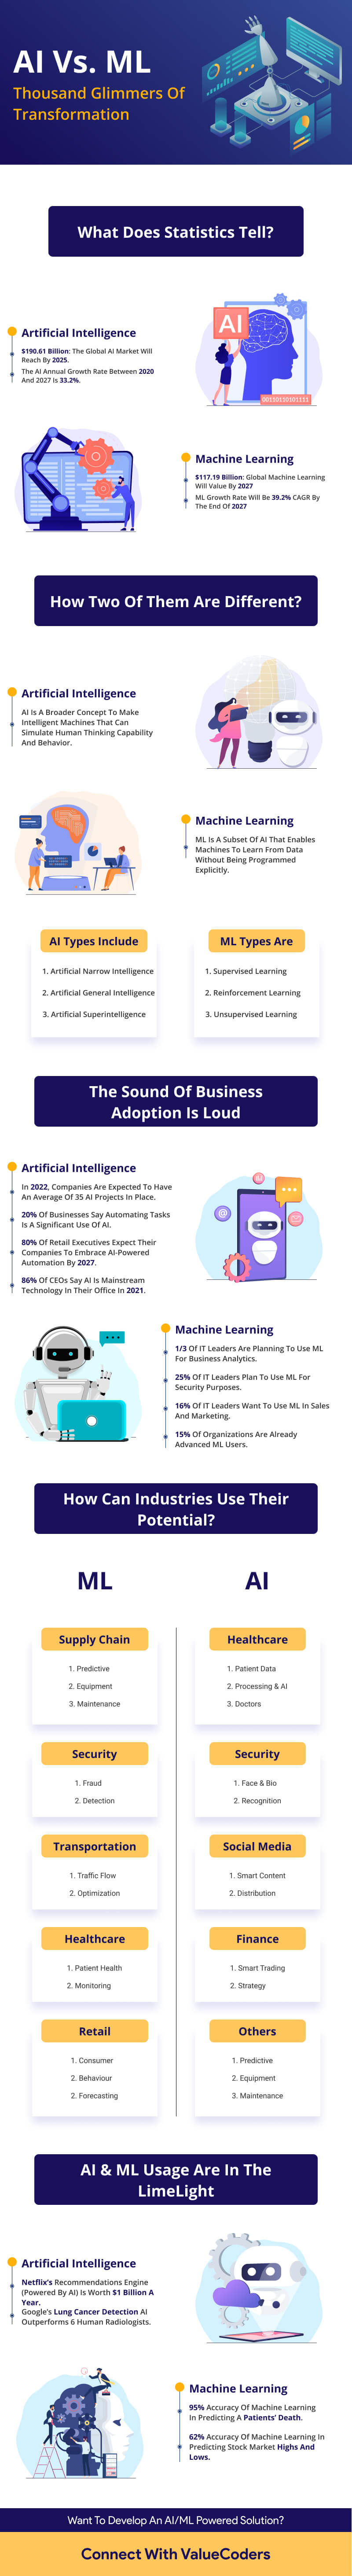 Artificial Intelligence vs Machine Learning 